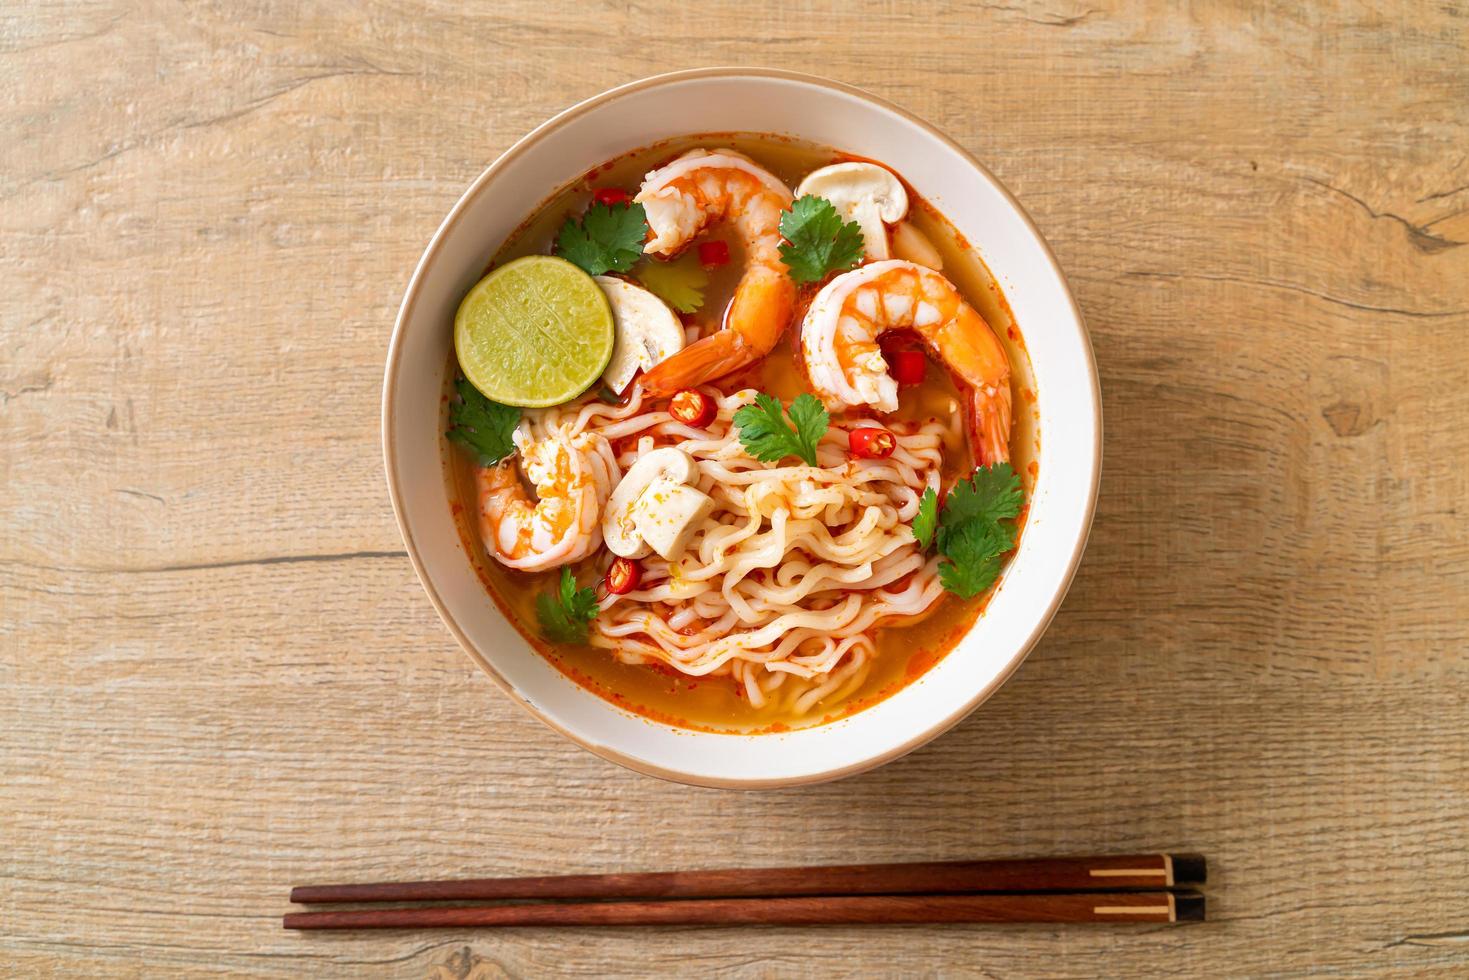 Instant noodles ramen in spicy soup with shrimps - Tom Yum Kung - Asian food style photo